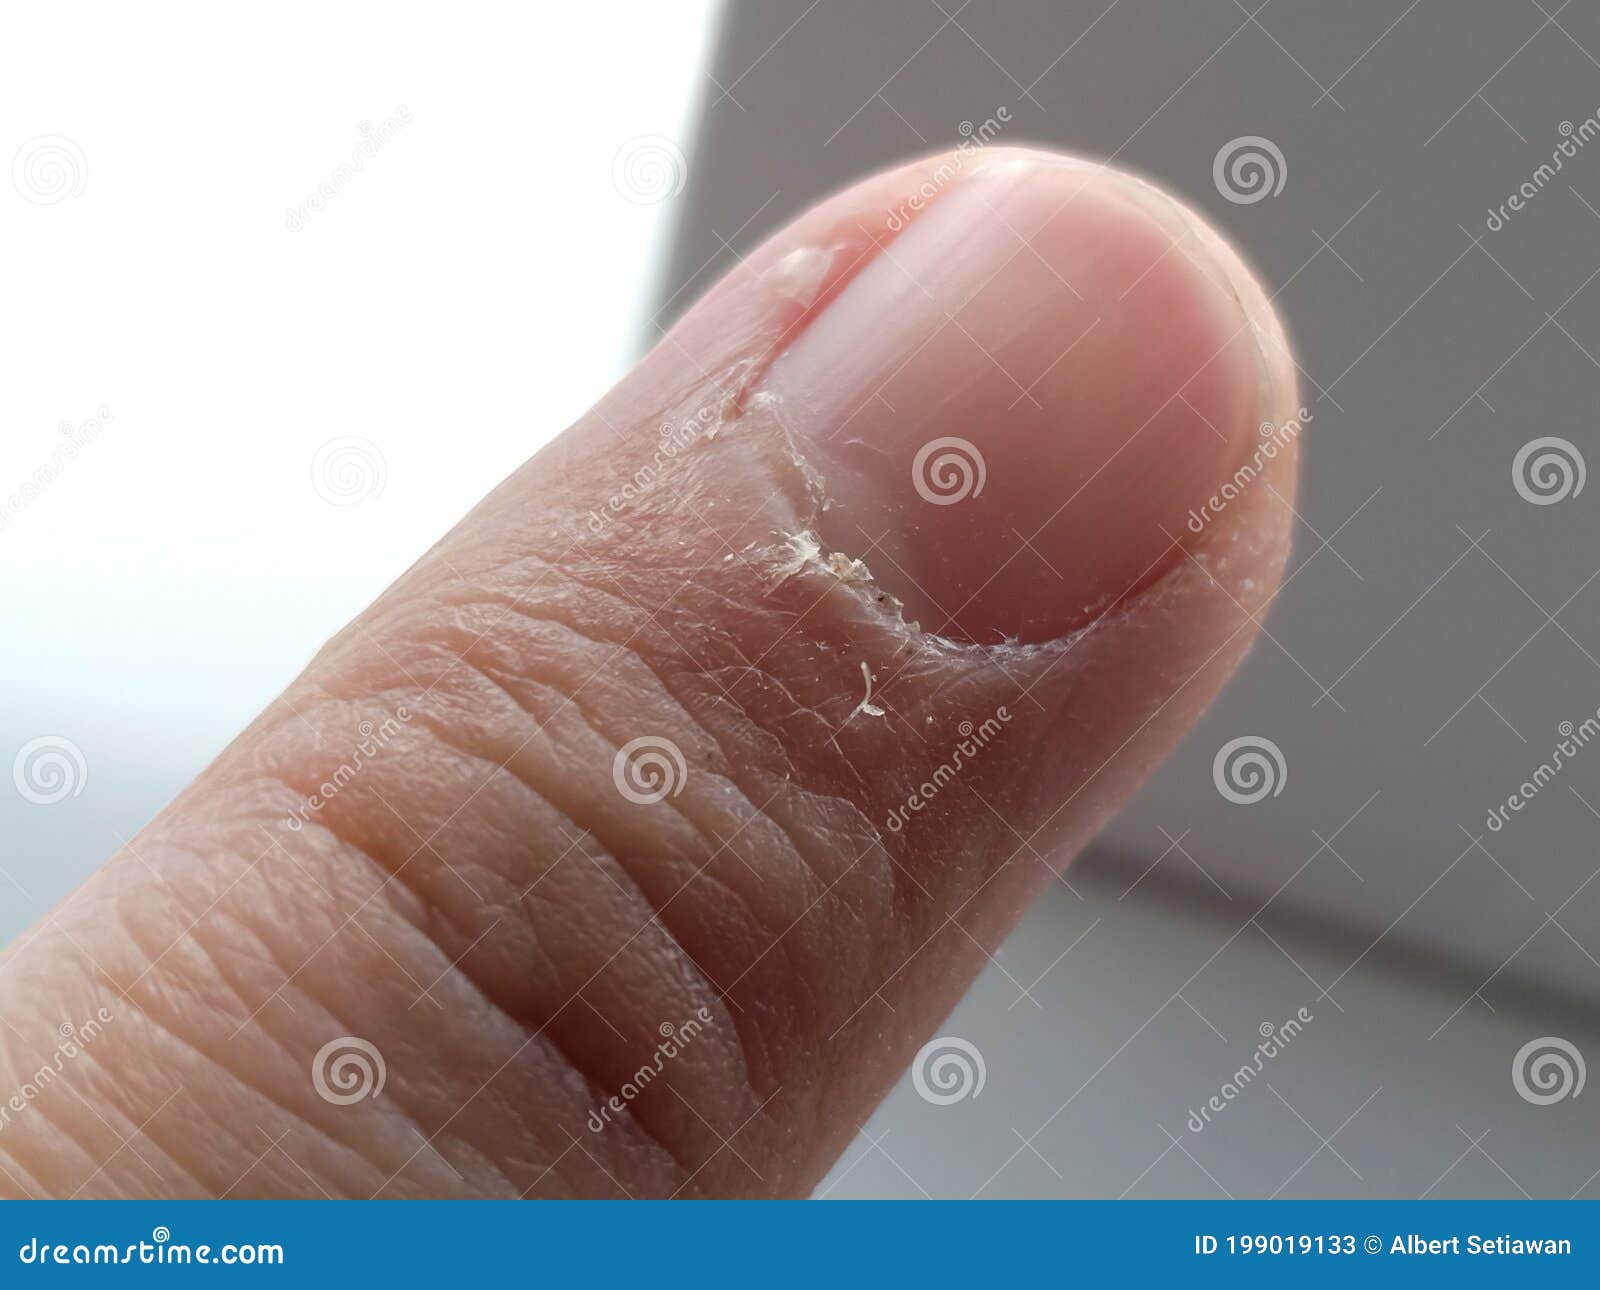 close up of my index fingers with dry, cracked skin on cuticles, skin is torn and flaking off.